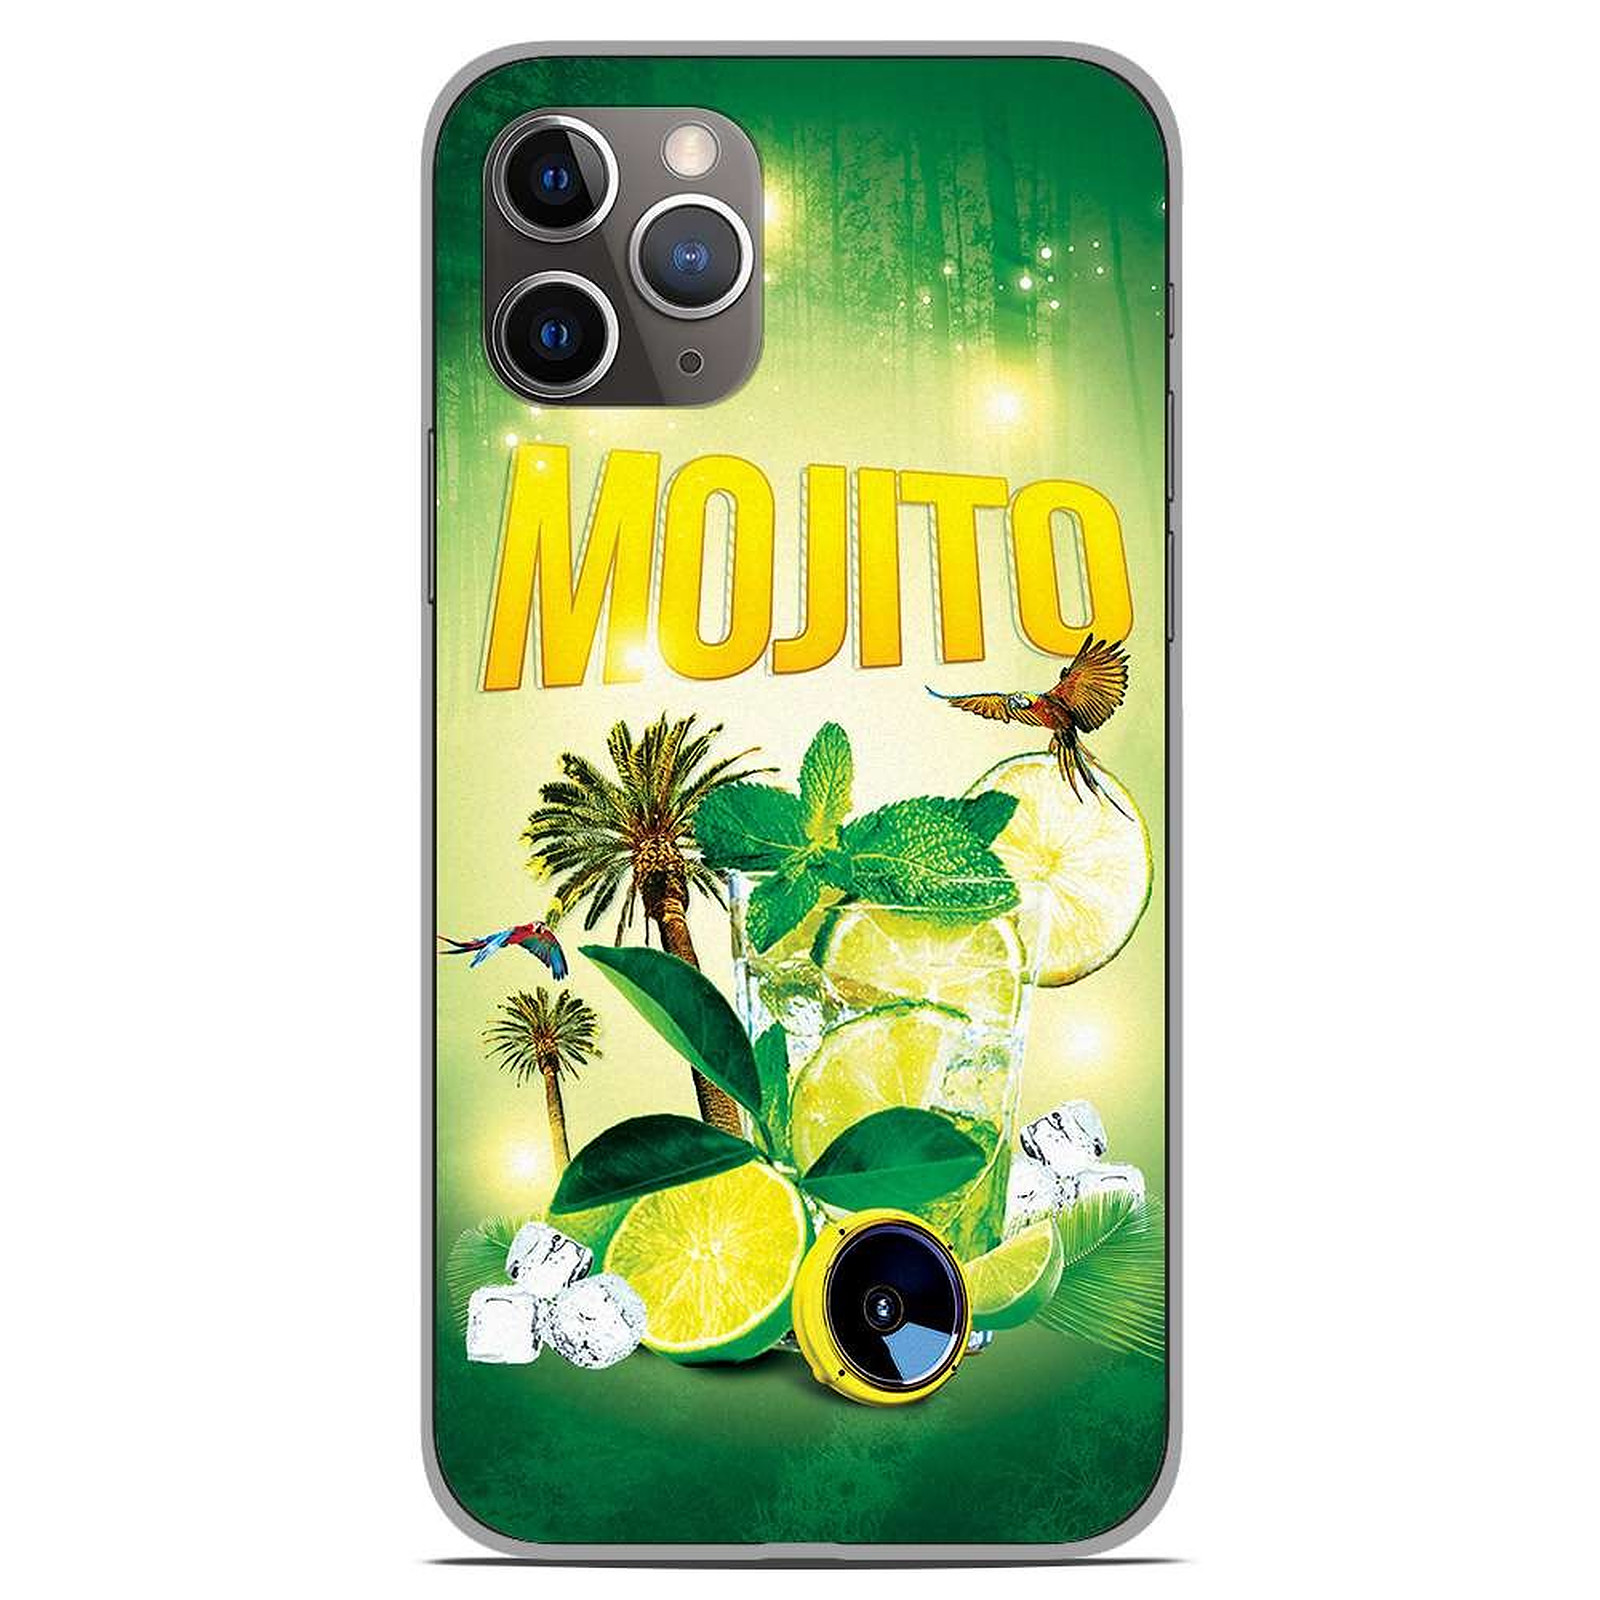 1001 Coques Coque silicone gel Apple iPhone 11 Pro motif Mojito Foret - Coque telephone 1001Coques